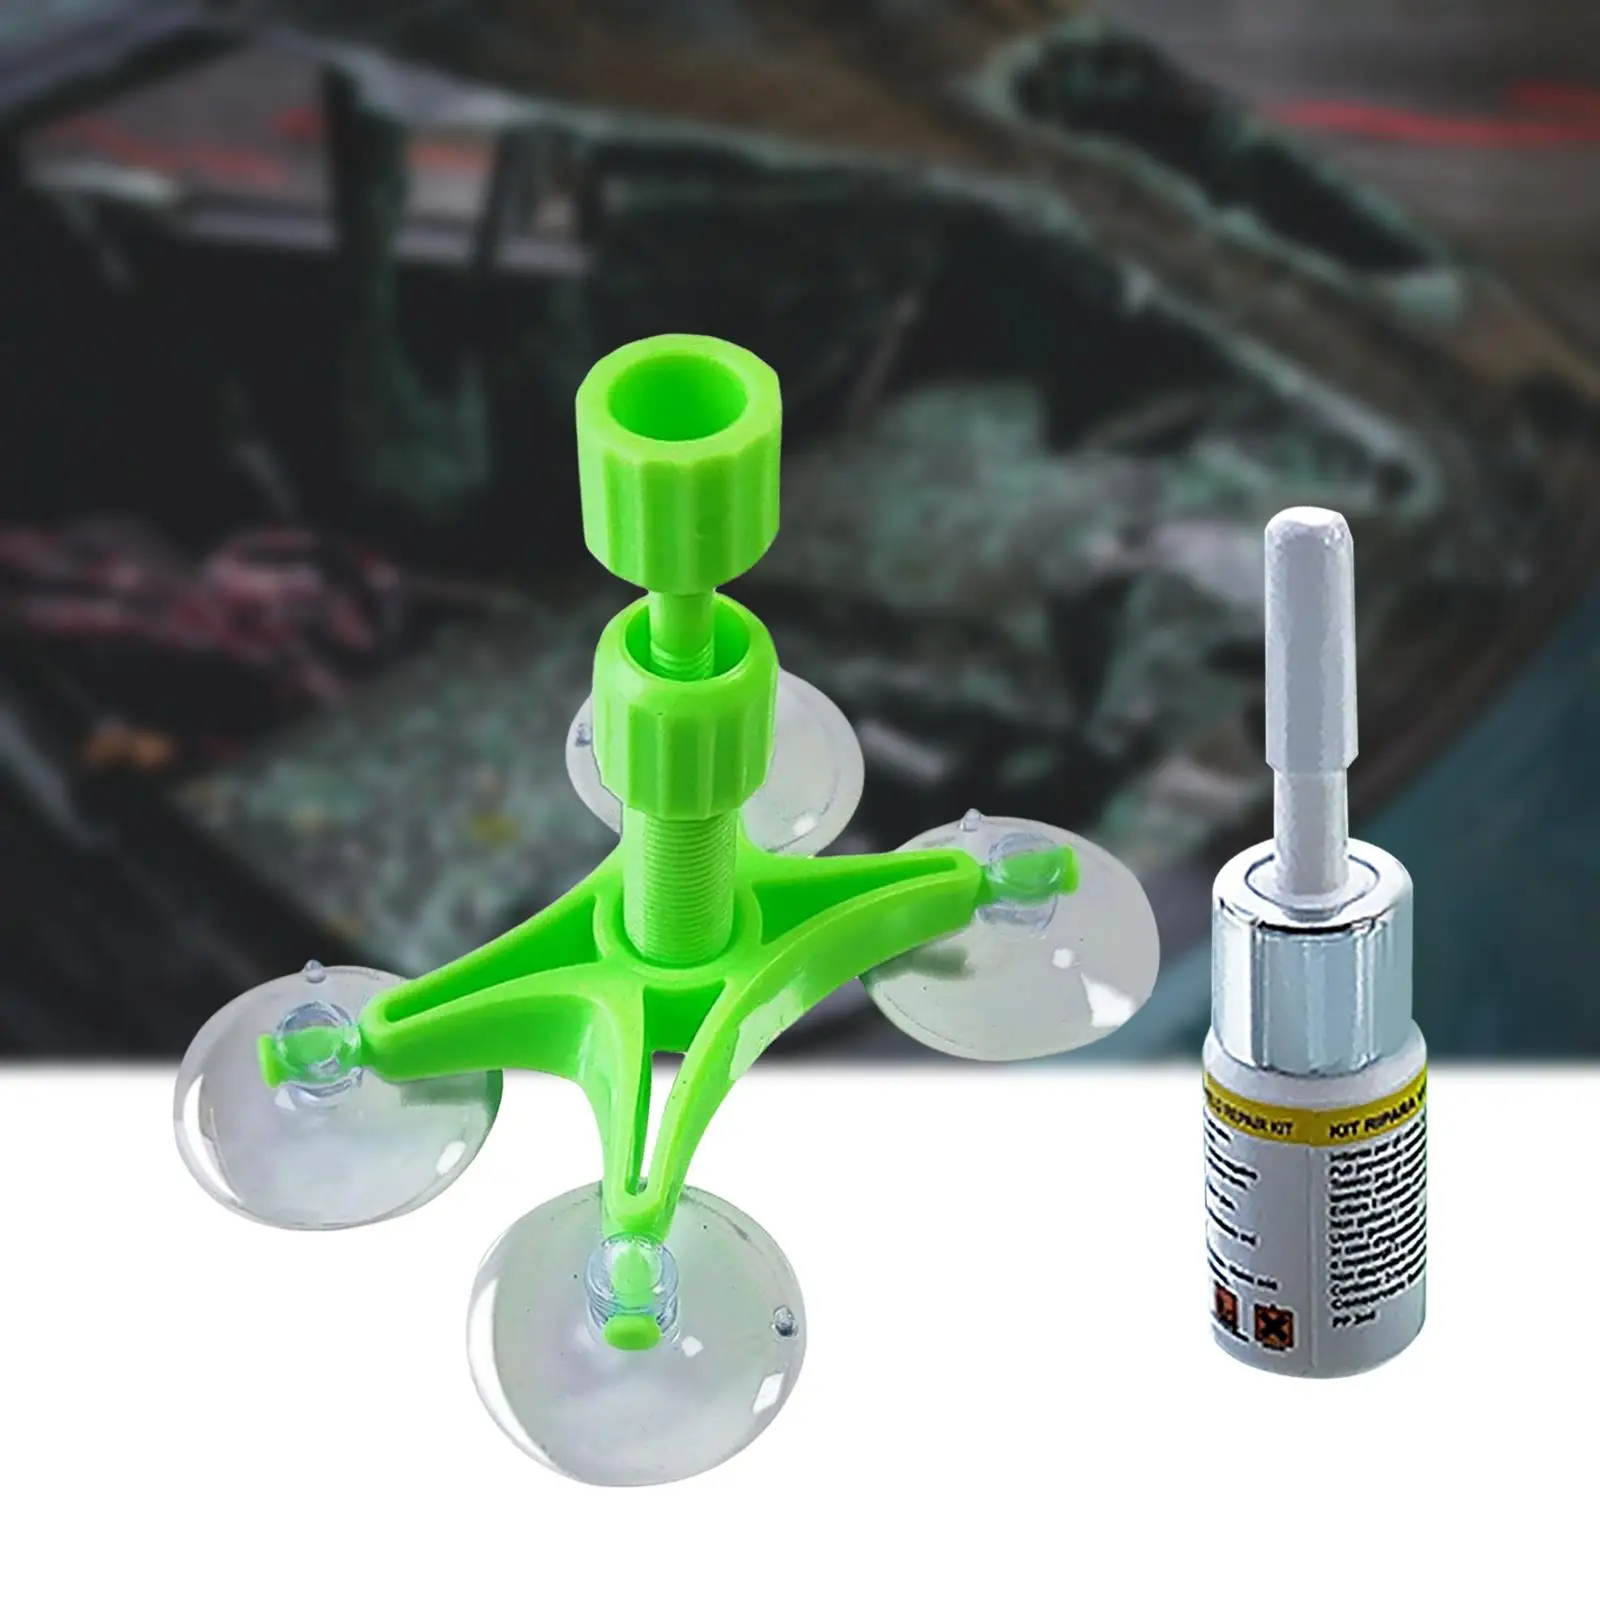 Automotive Windshield Crack Repairing Kit, for Chips and Cracks Easy to Operate DIY Widely Use Professional